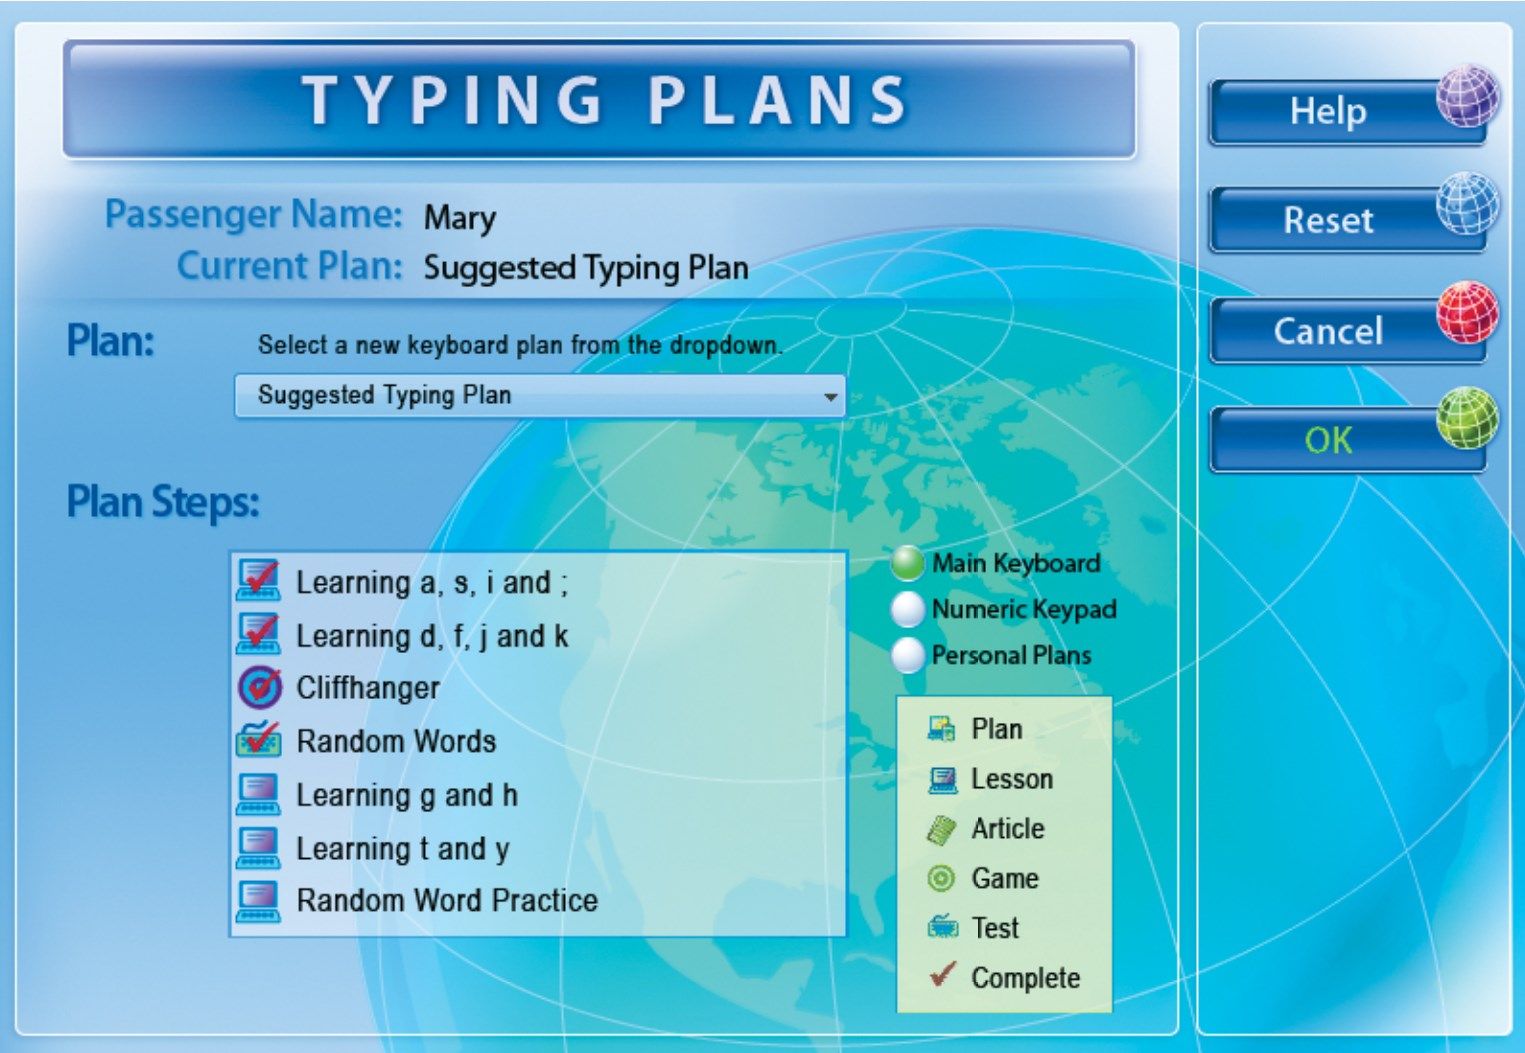 Reach your words-per-minute goal quickly with the Suggested Typing Plan.